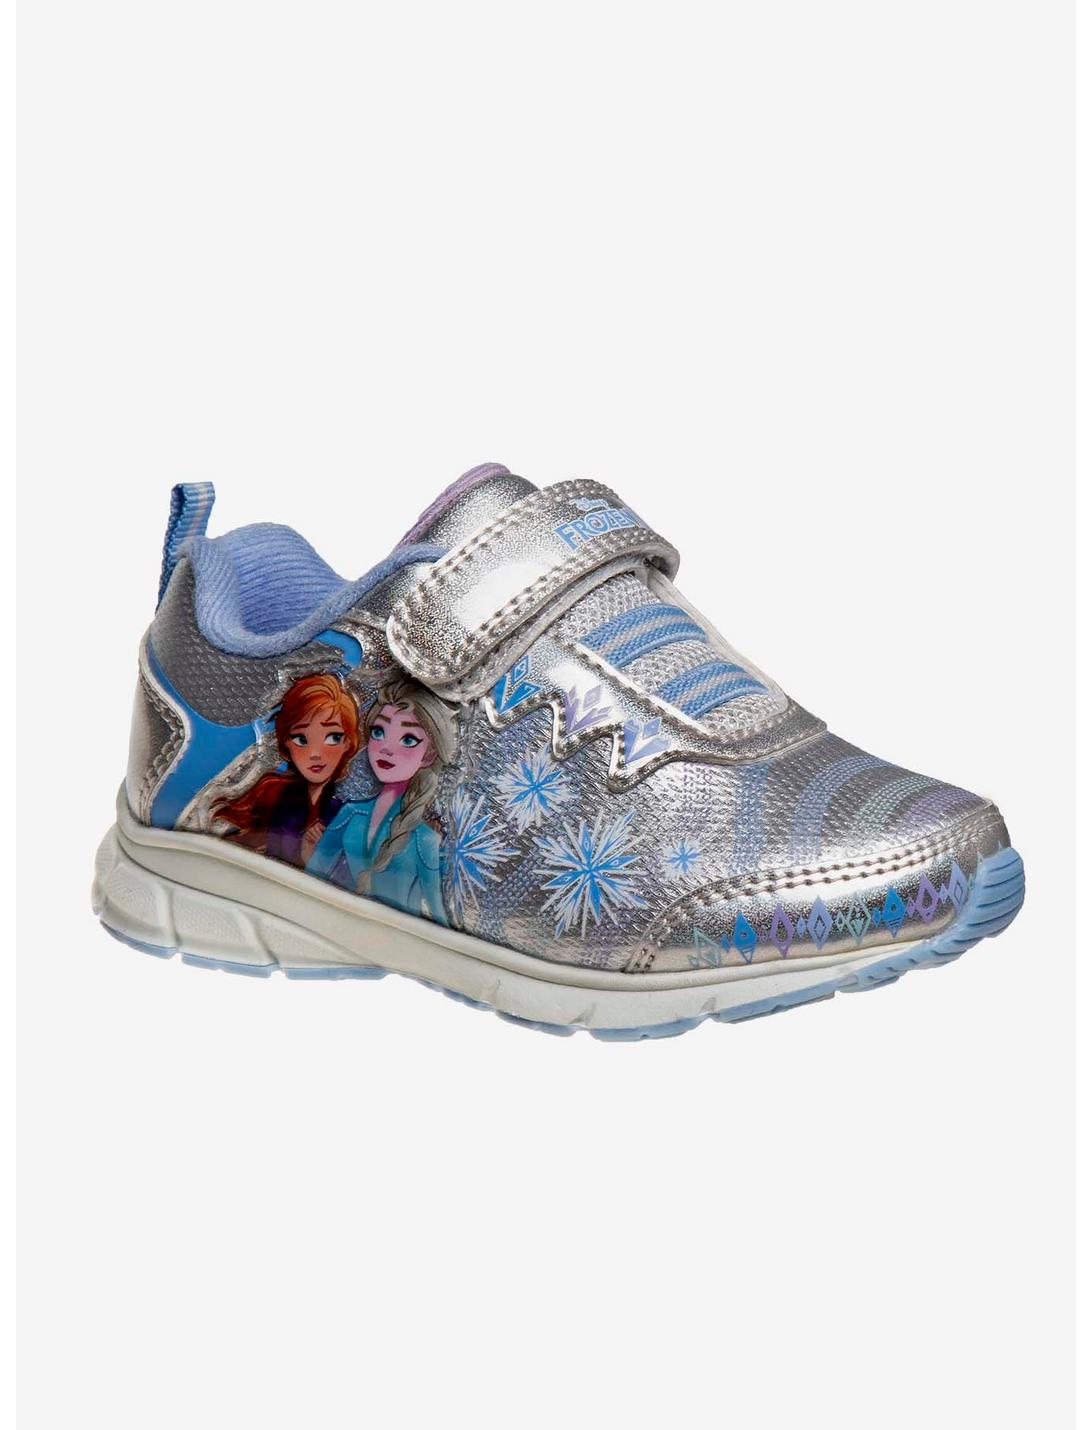 Disney Frozen 2 Girls Sneakers With Lights Silver, SILVER, hi-res